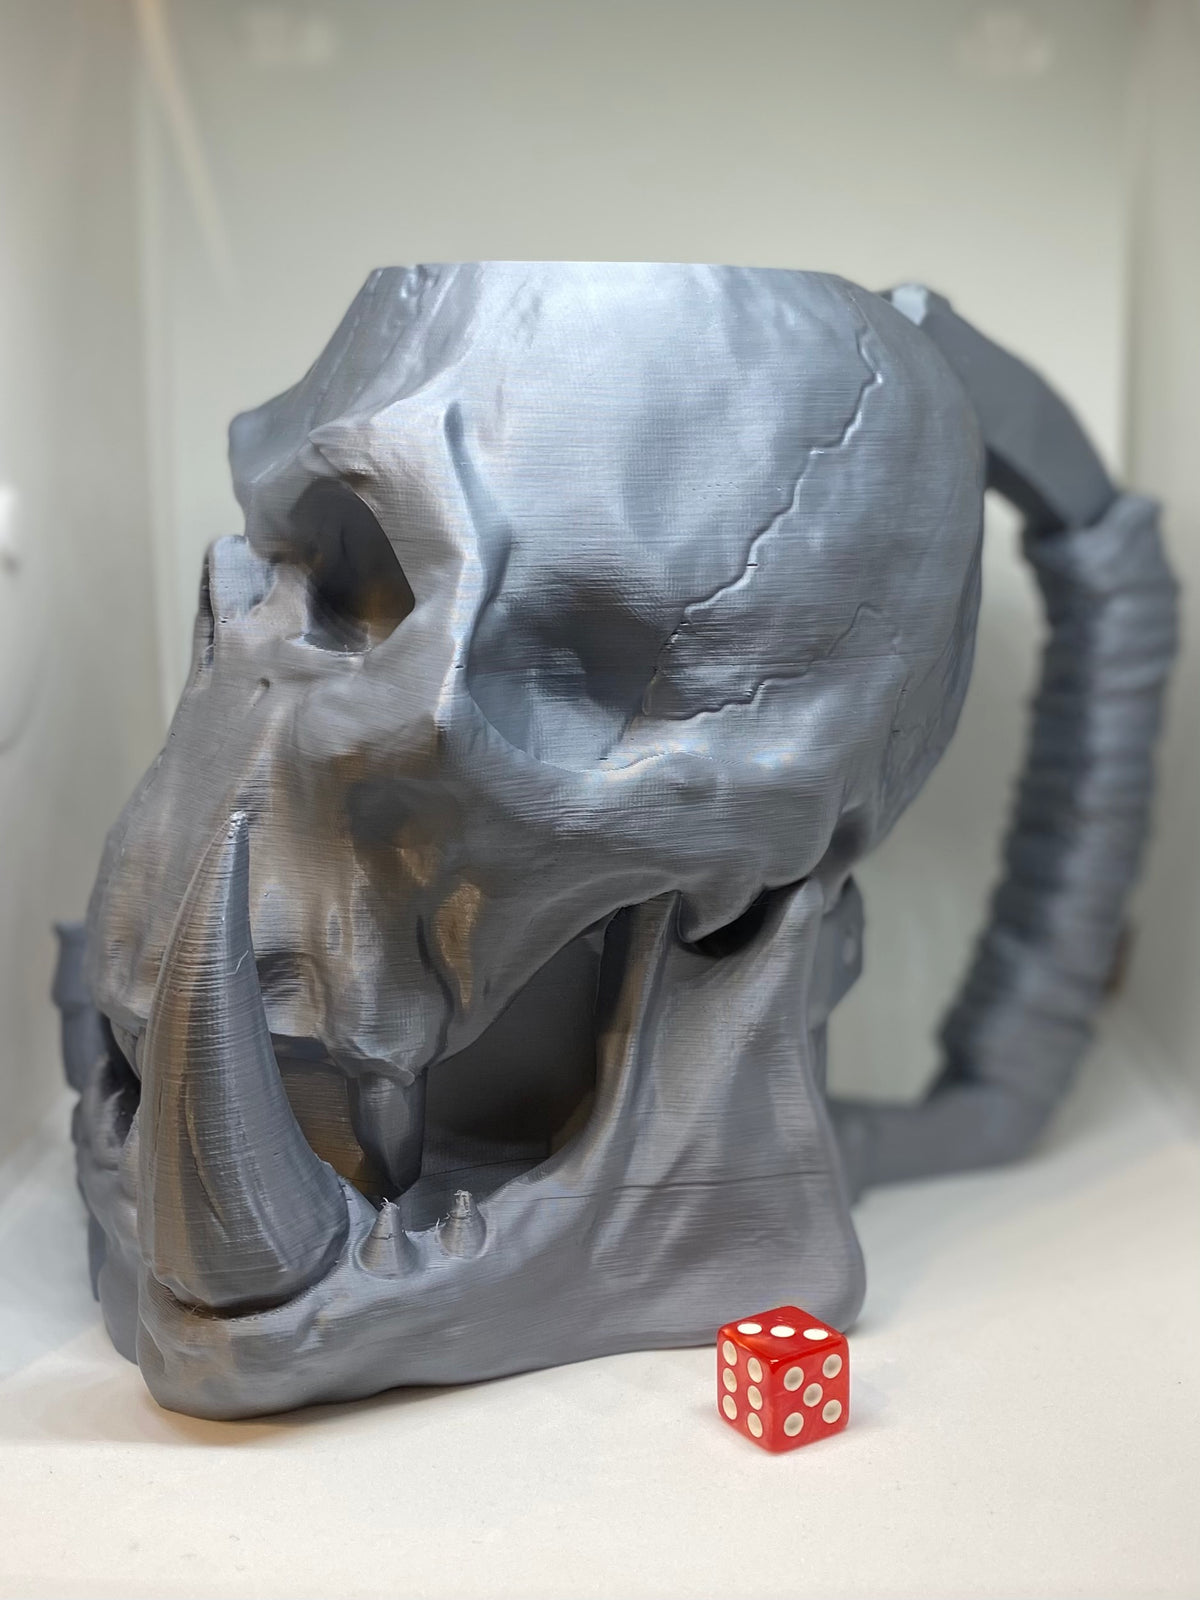 The Orc Skull Themed Mythic Mug with FREE Insert/Riser